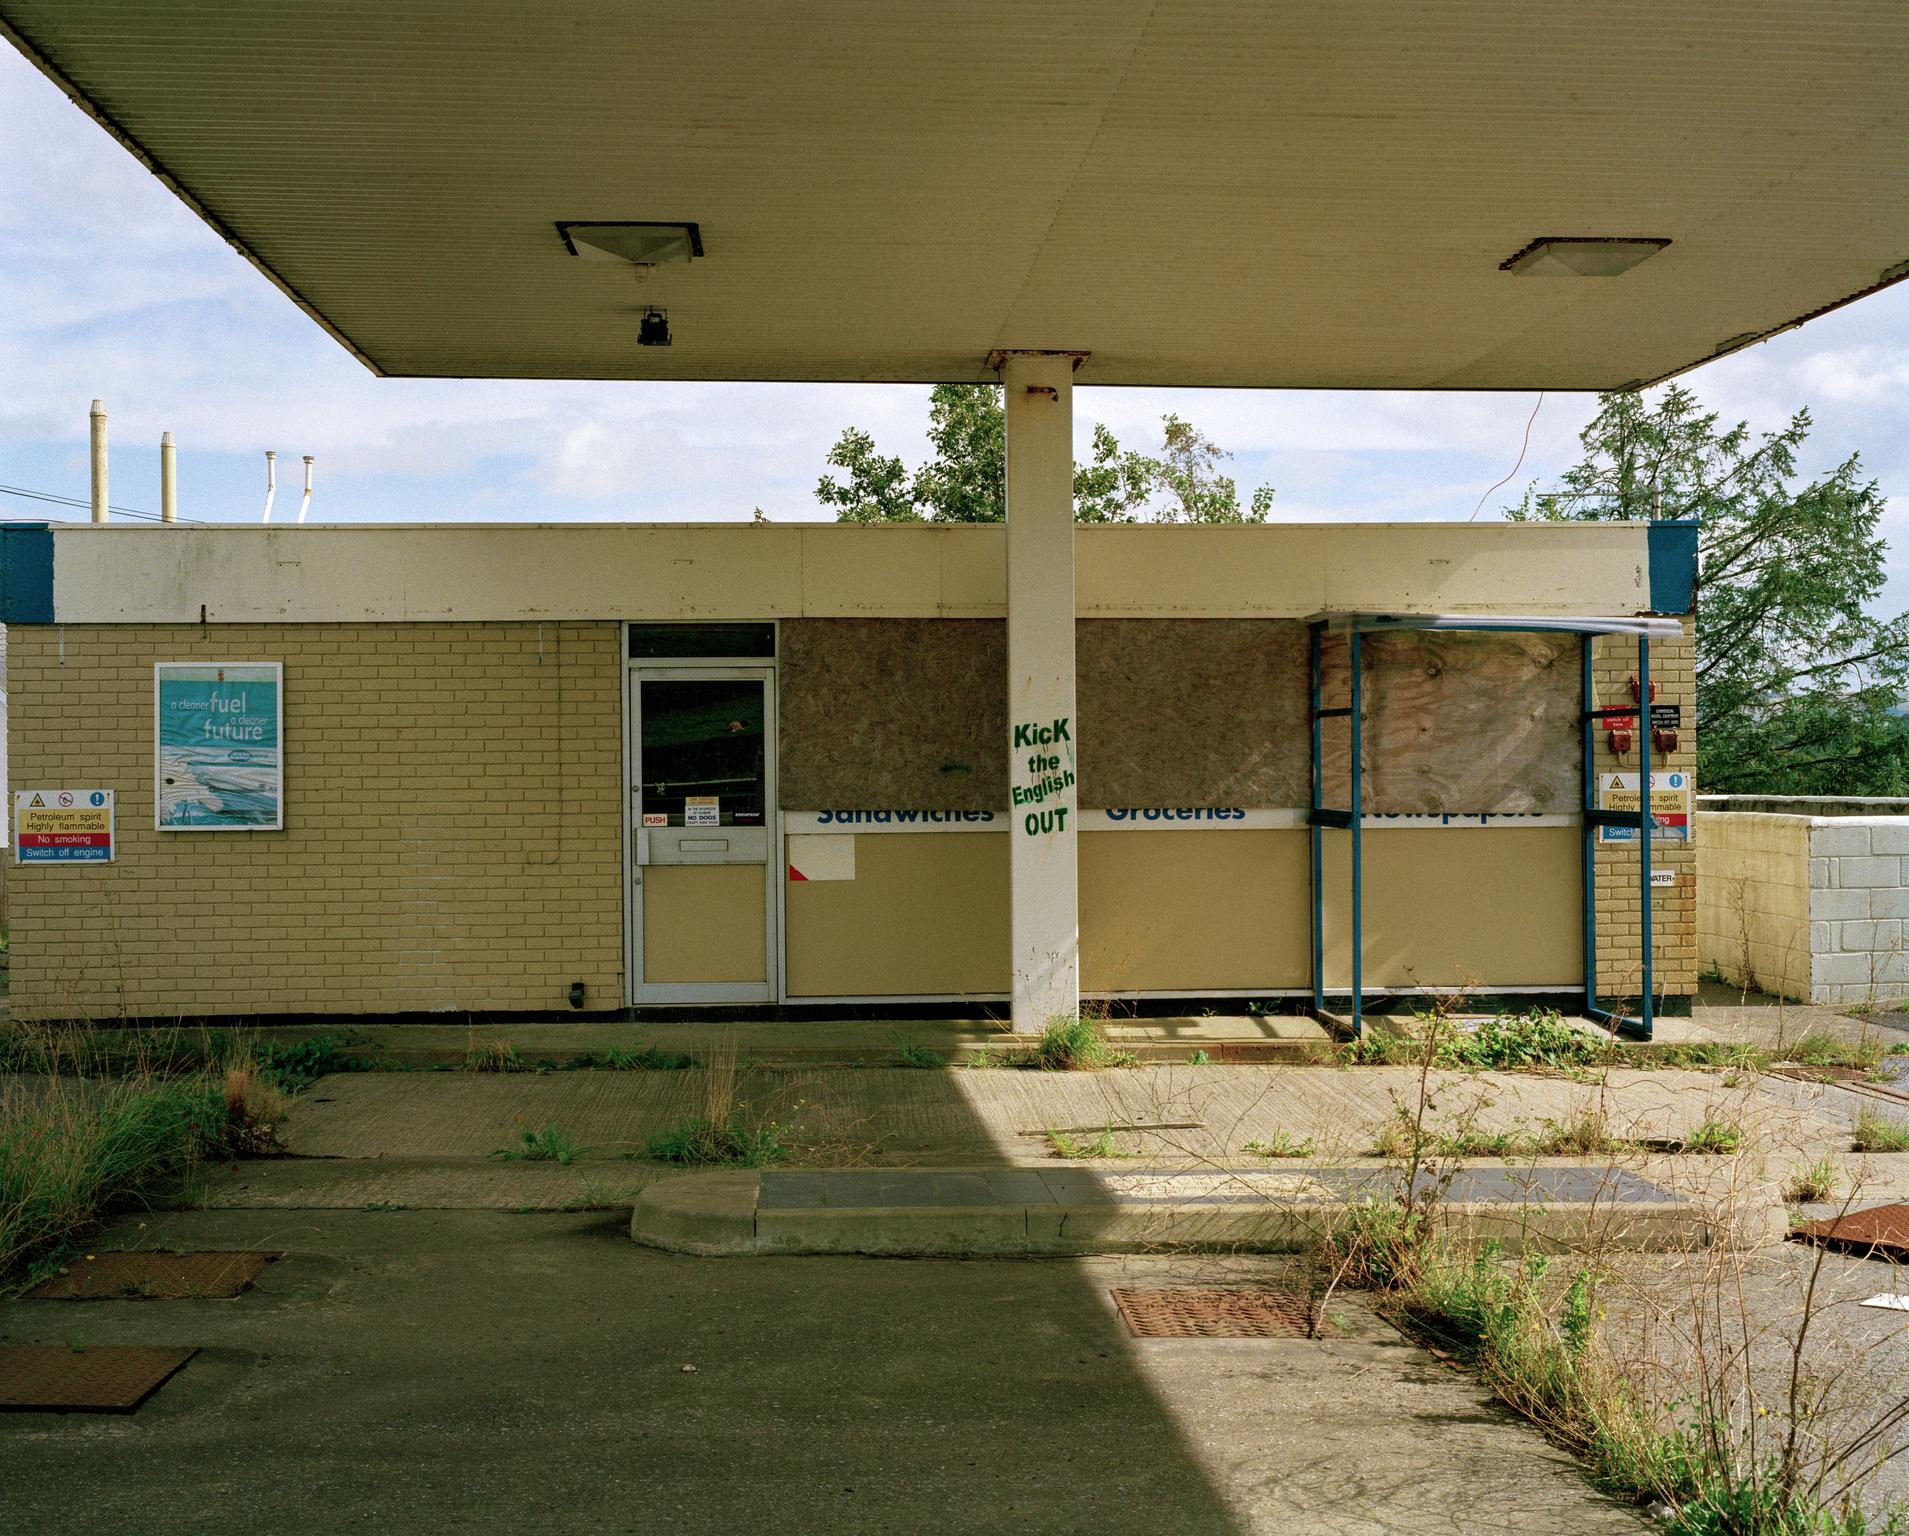 Abandoned petrol station. Welsh politics. Building aside the A40, Wales